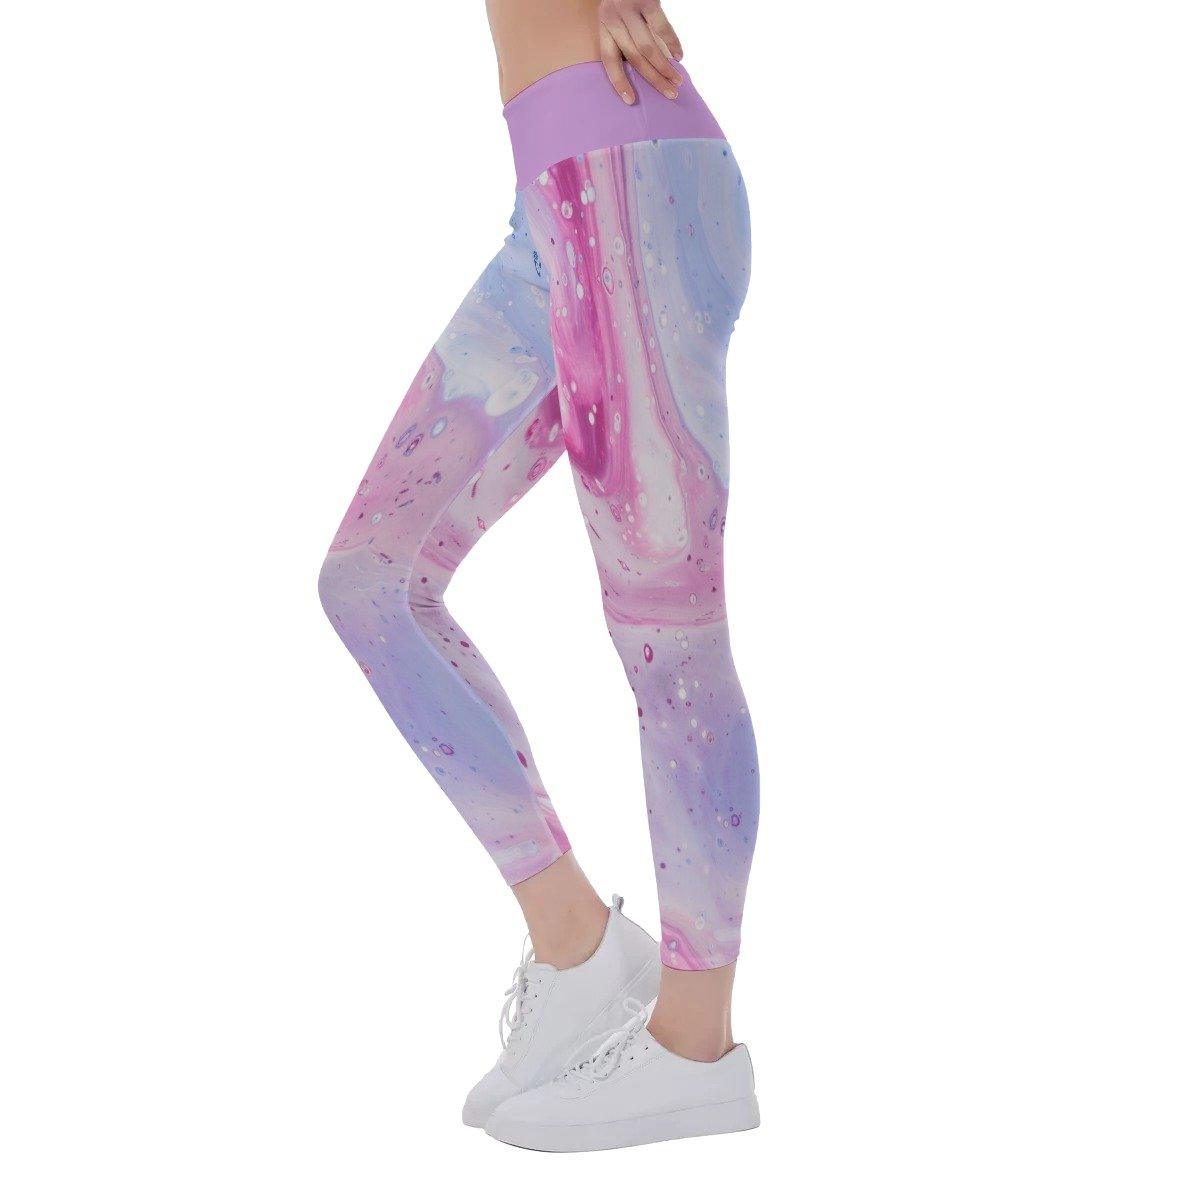 Women's Yoga Leggings - Colorful Pink - Personal Hour for Yoga and Meditations 